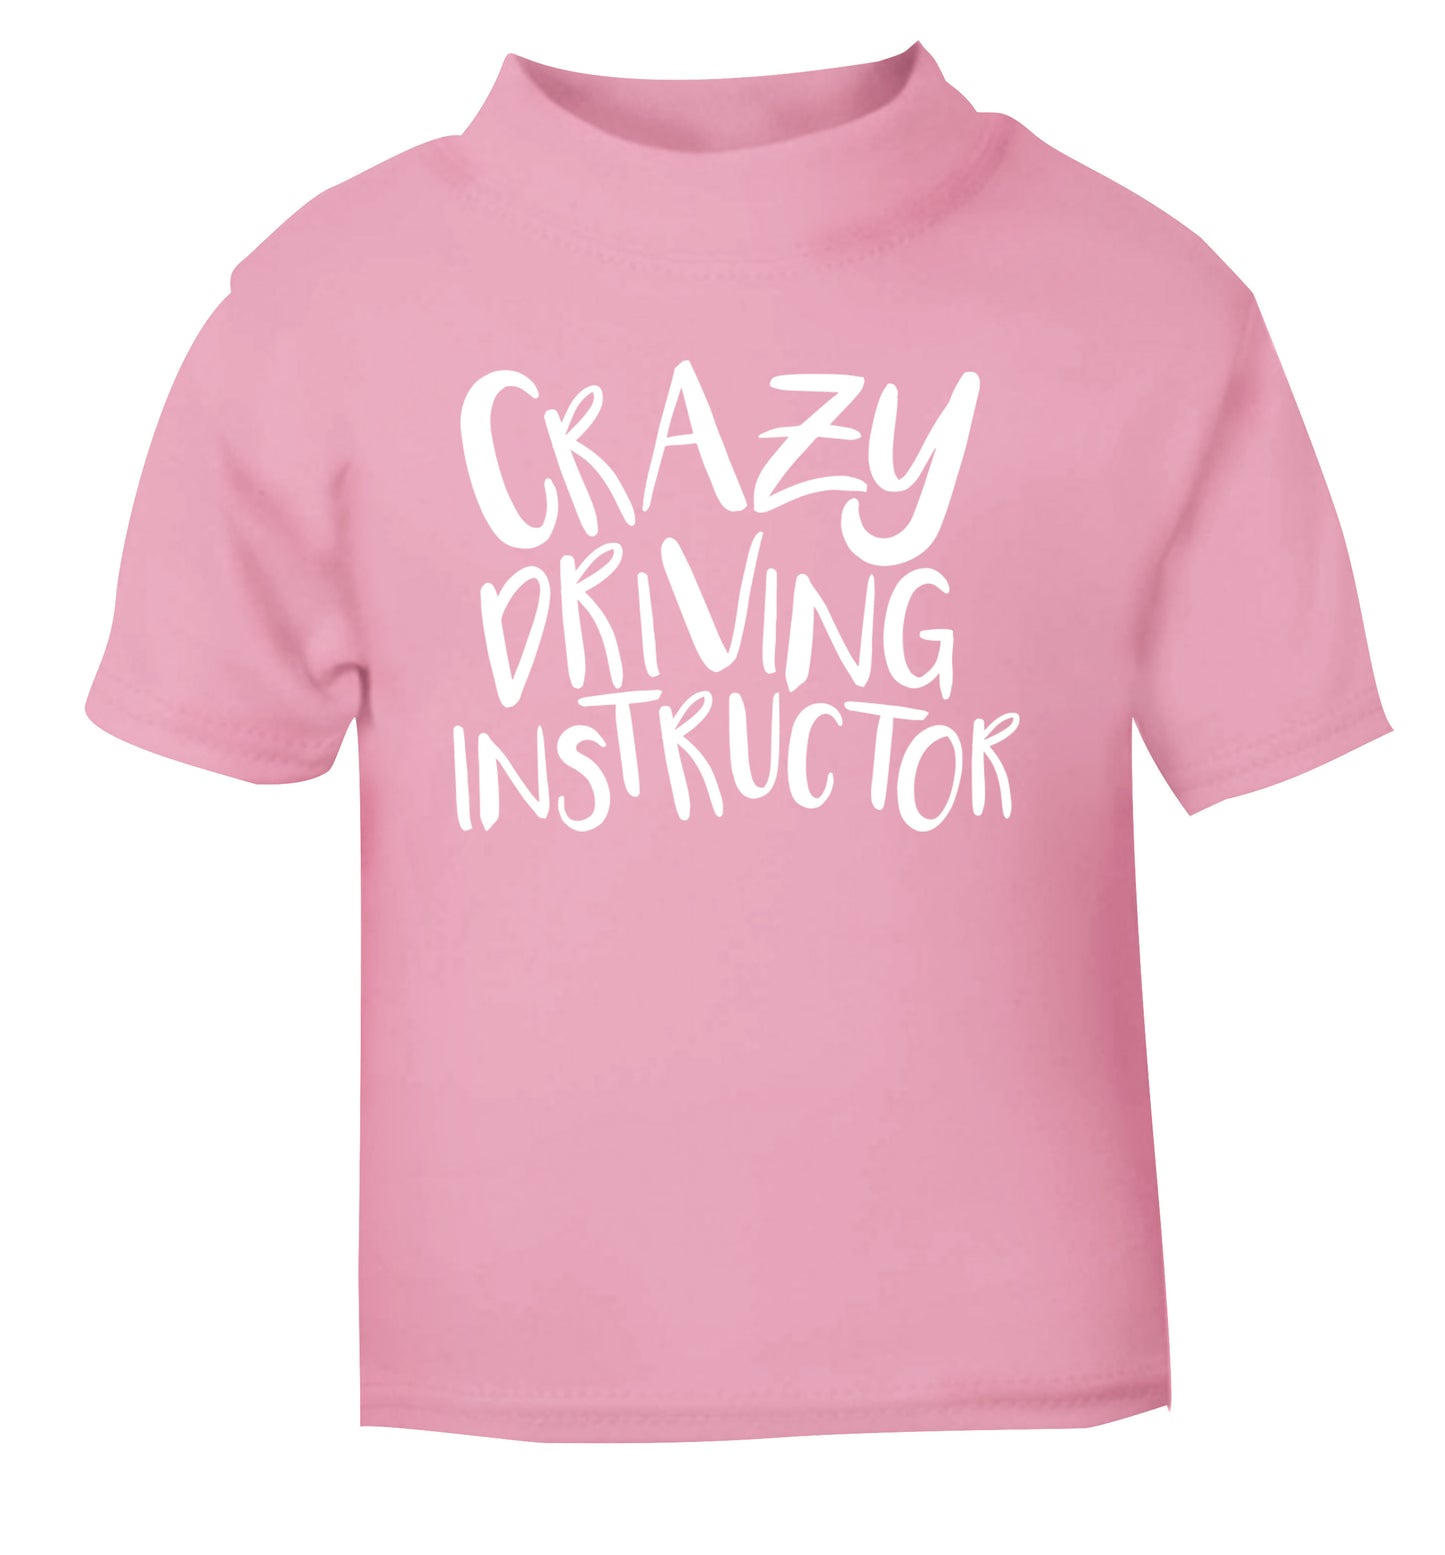 Crazy driving instructor light pink Baby Toddler Tshirt 2 Years